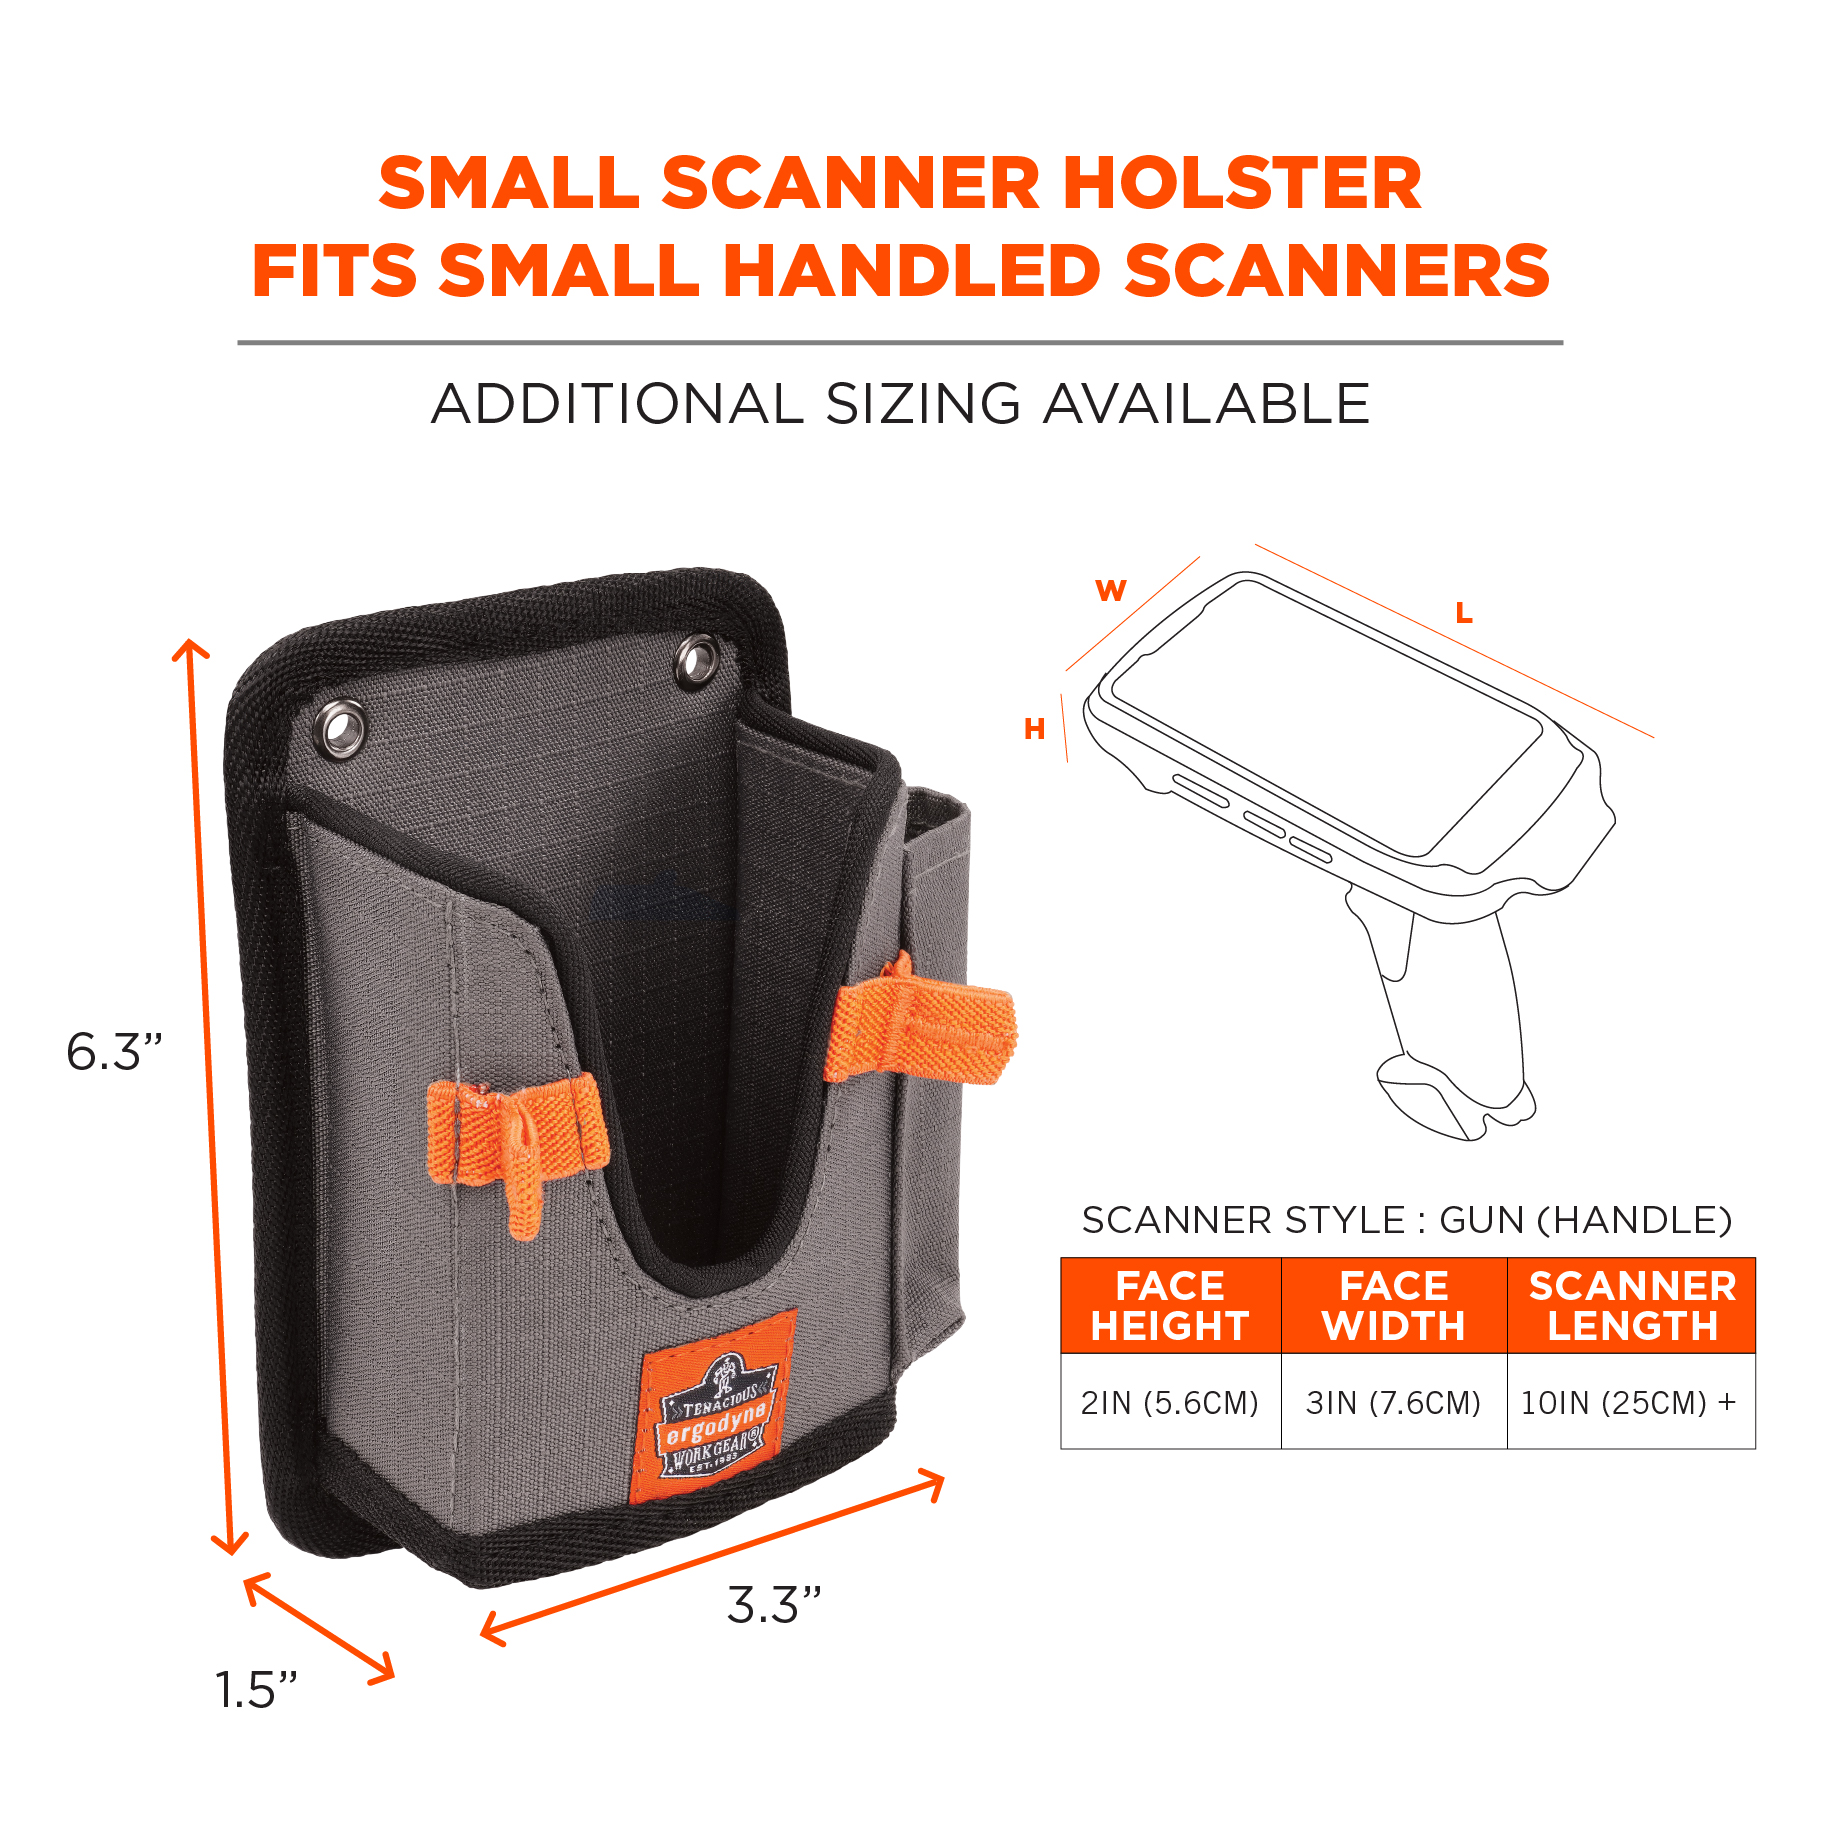 Mobile Scanner - Scanners